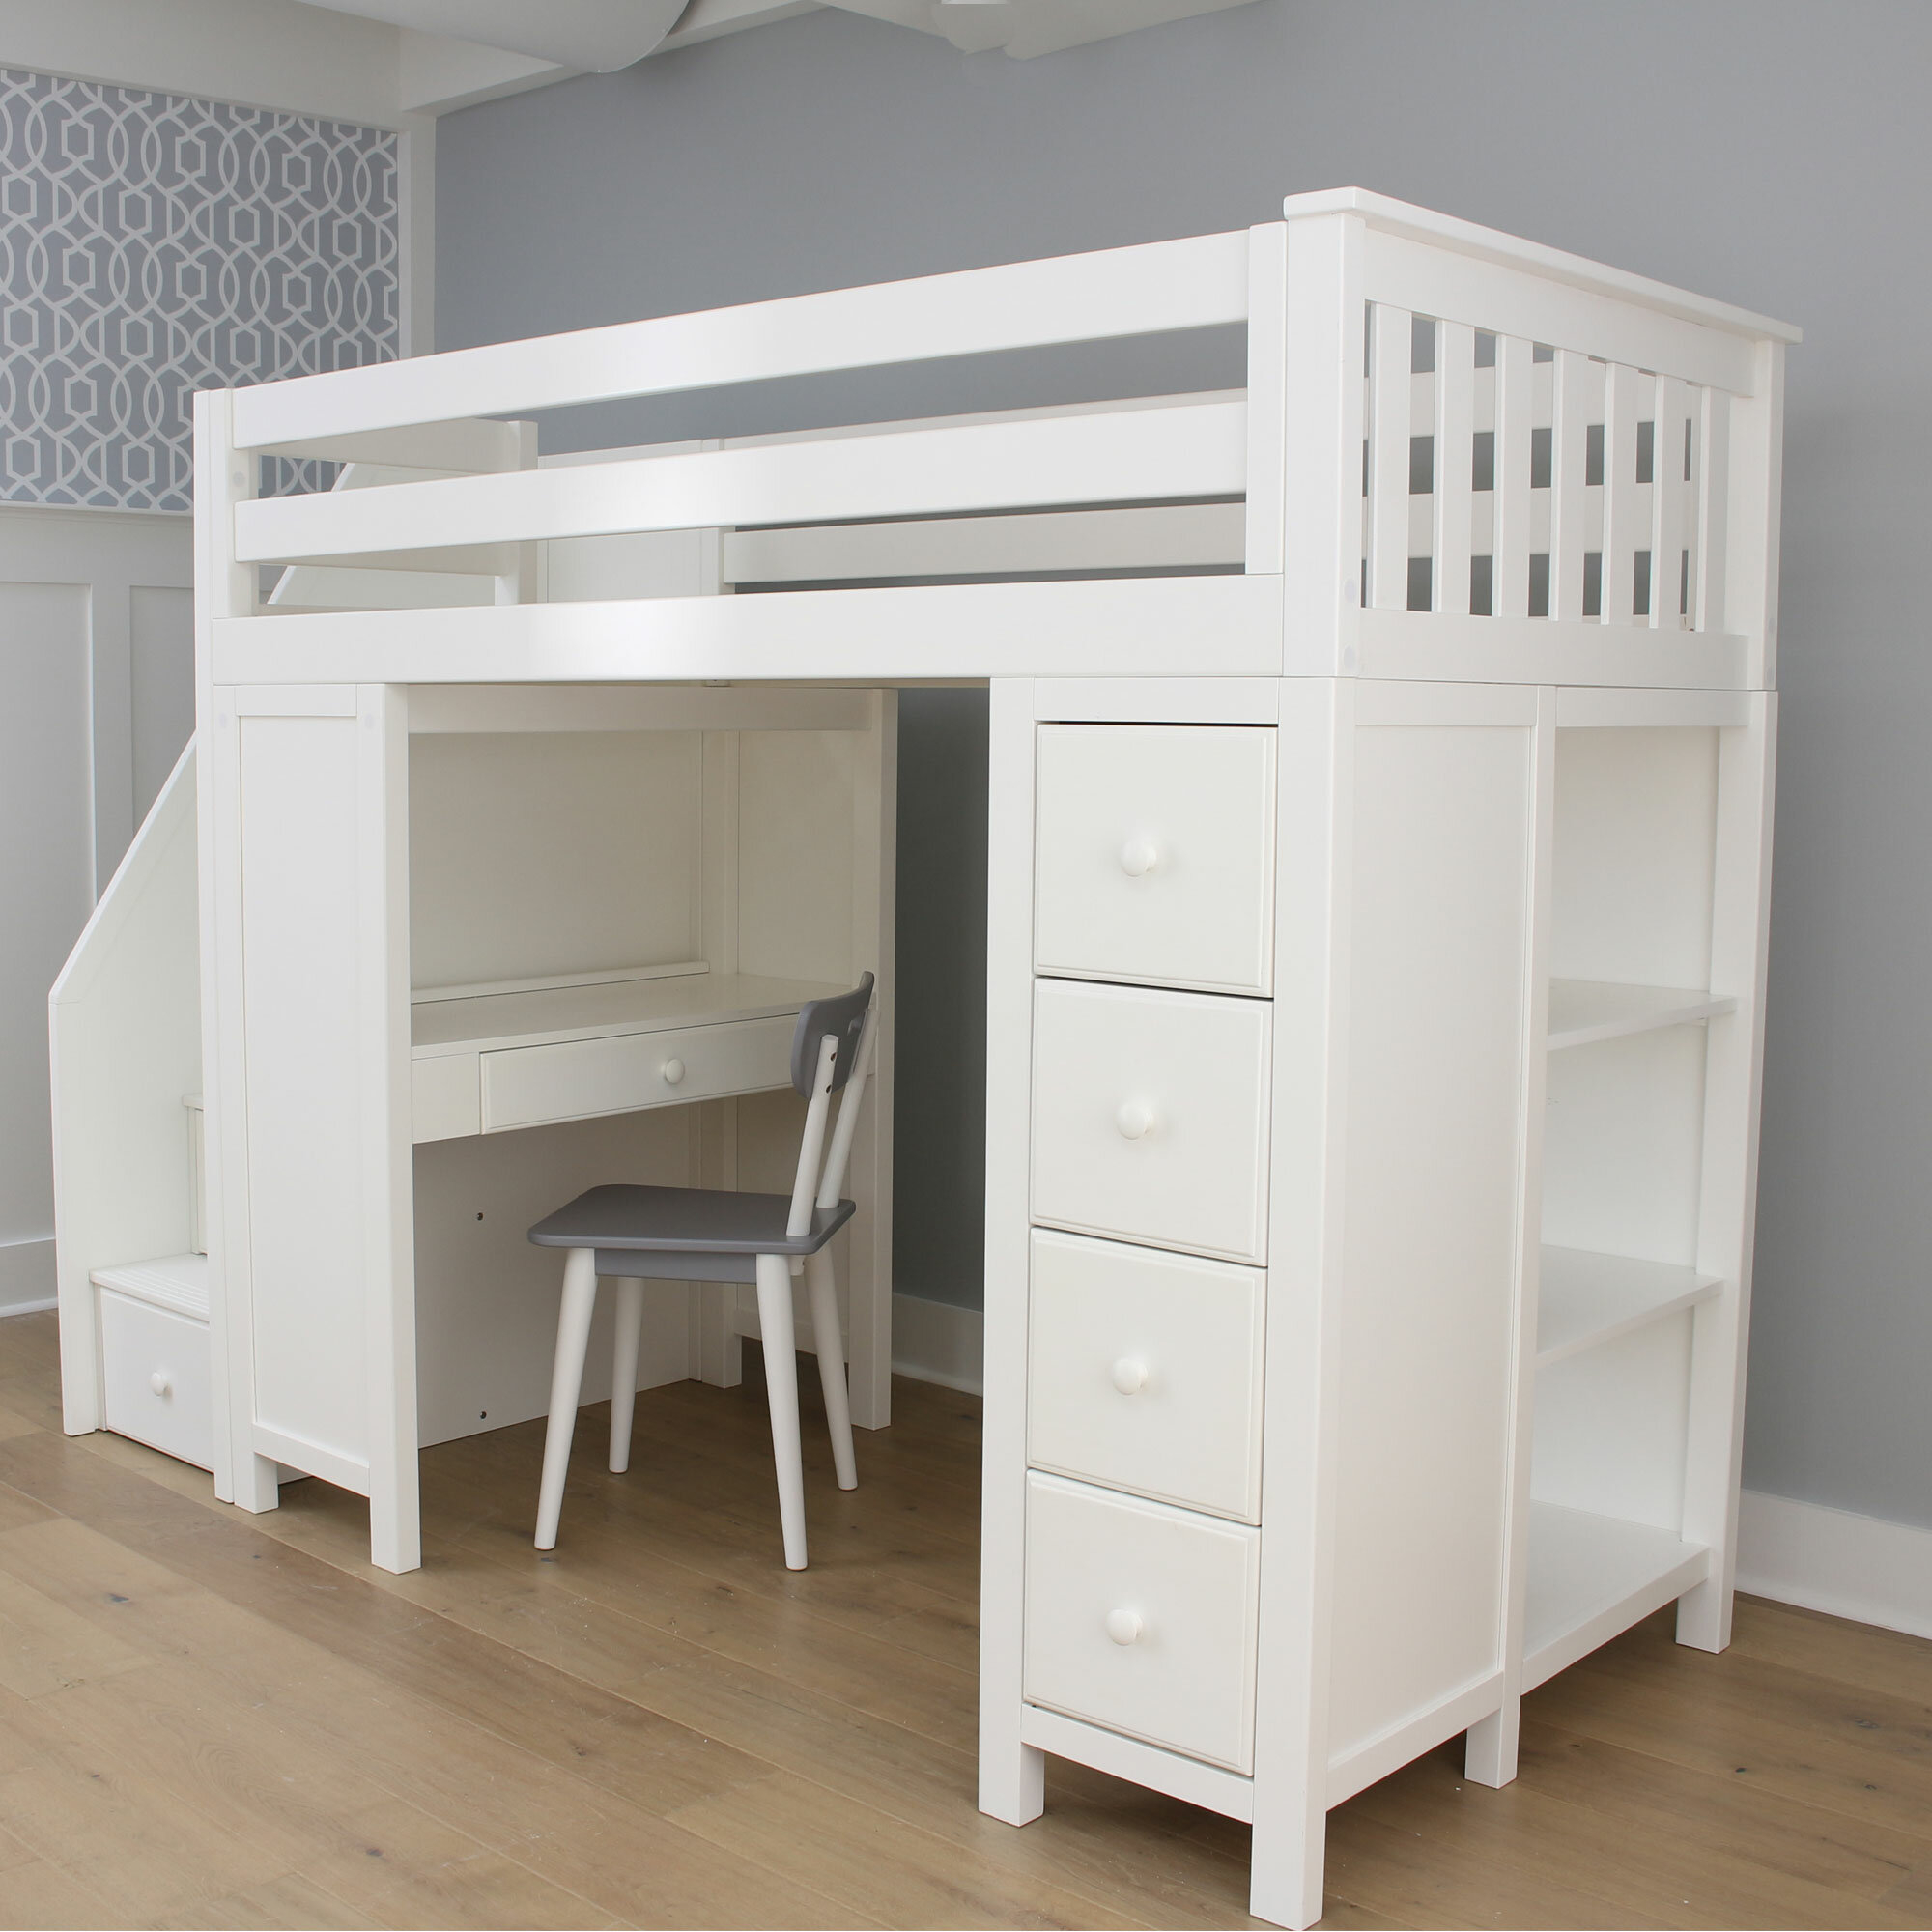 Bunk Beds With Dressers Visualhunt, Bunk Bed With Closet And Desk